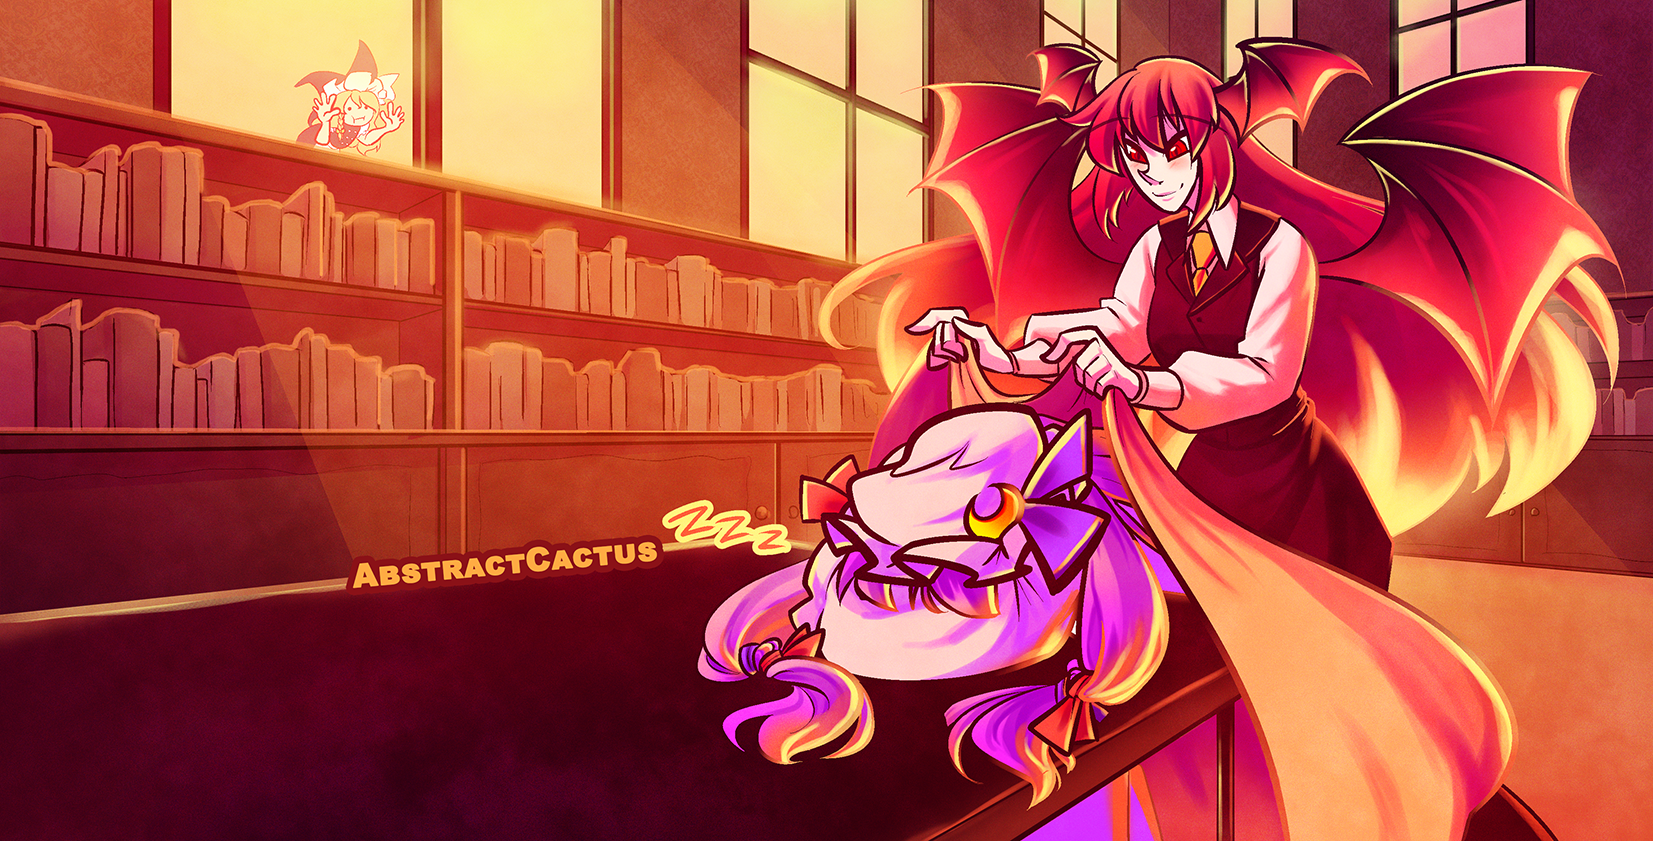 Patchouli from Touhou, passed out asleep at a table in her library. Koakuma is happily throwing a blanket over her, while Marisa can be seen in the background pressing her face up against a window, ready to take the opportunity to break in.